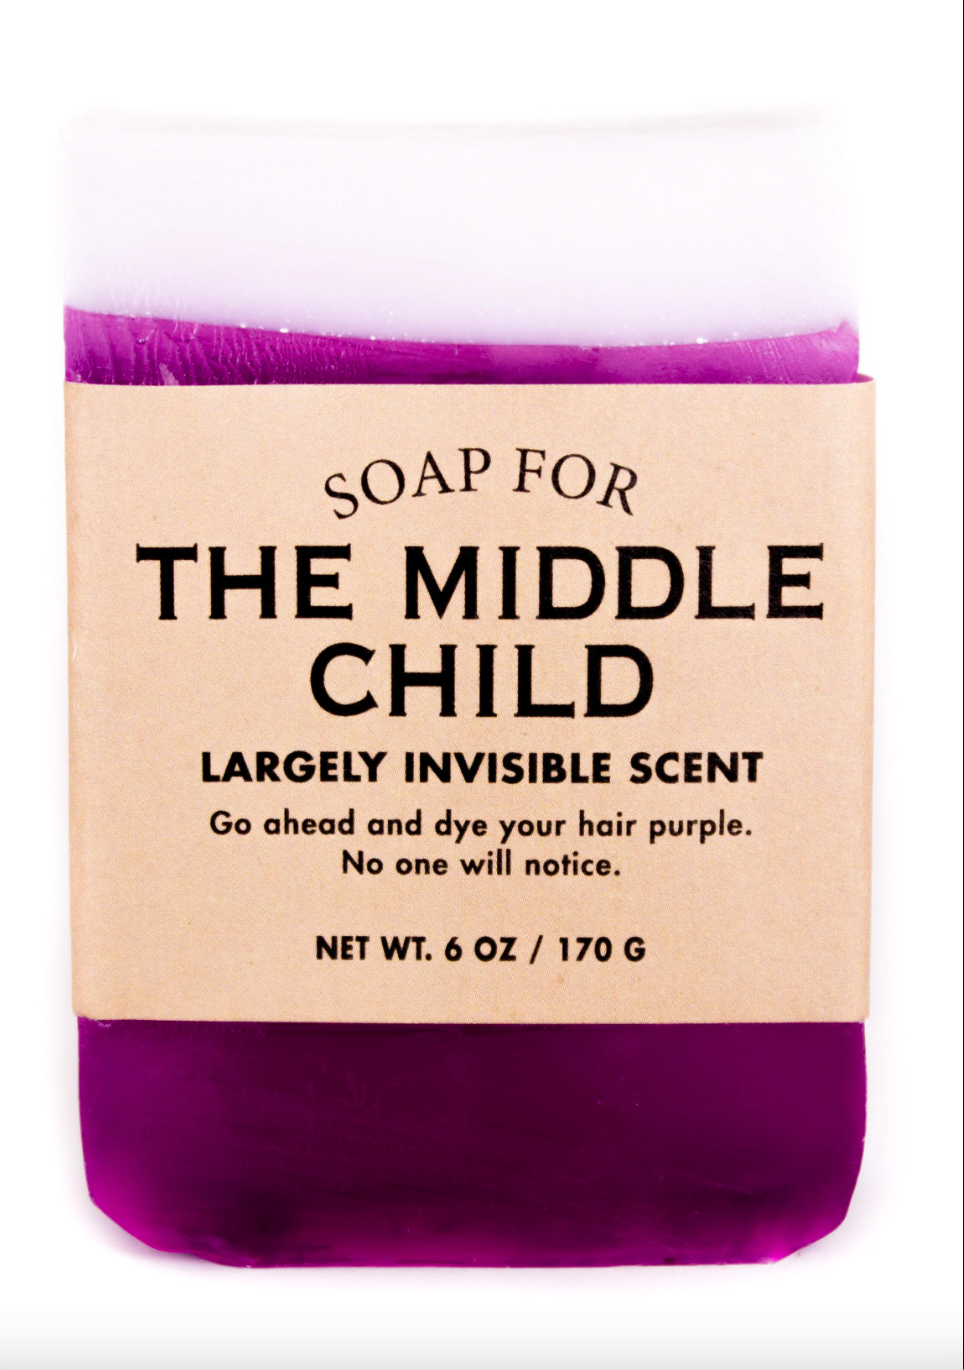 Soap for the Middle Child - Heart of the Home LV